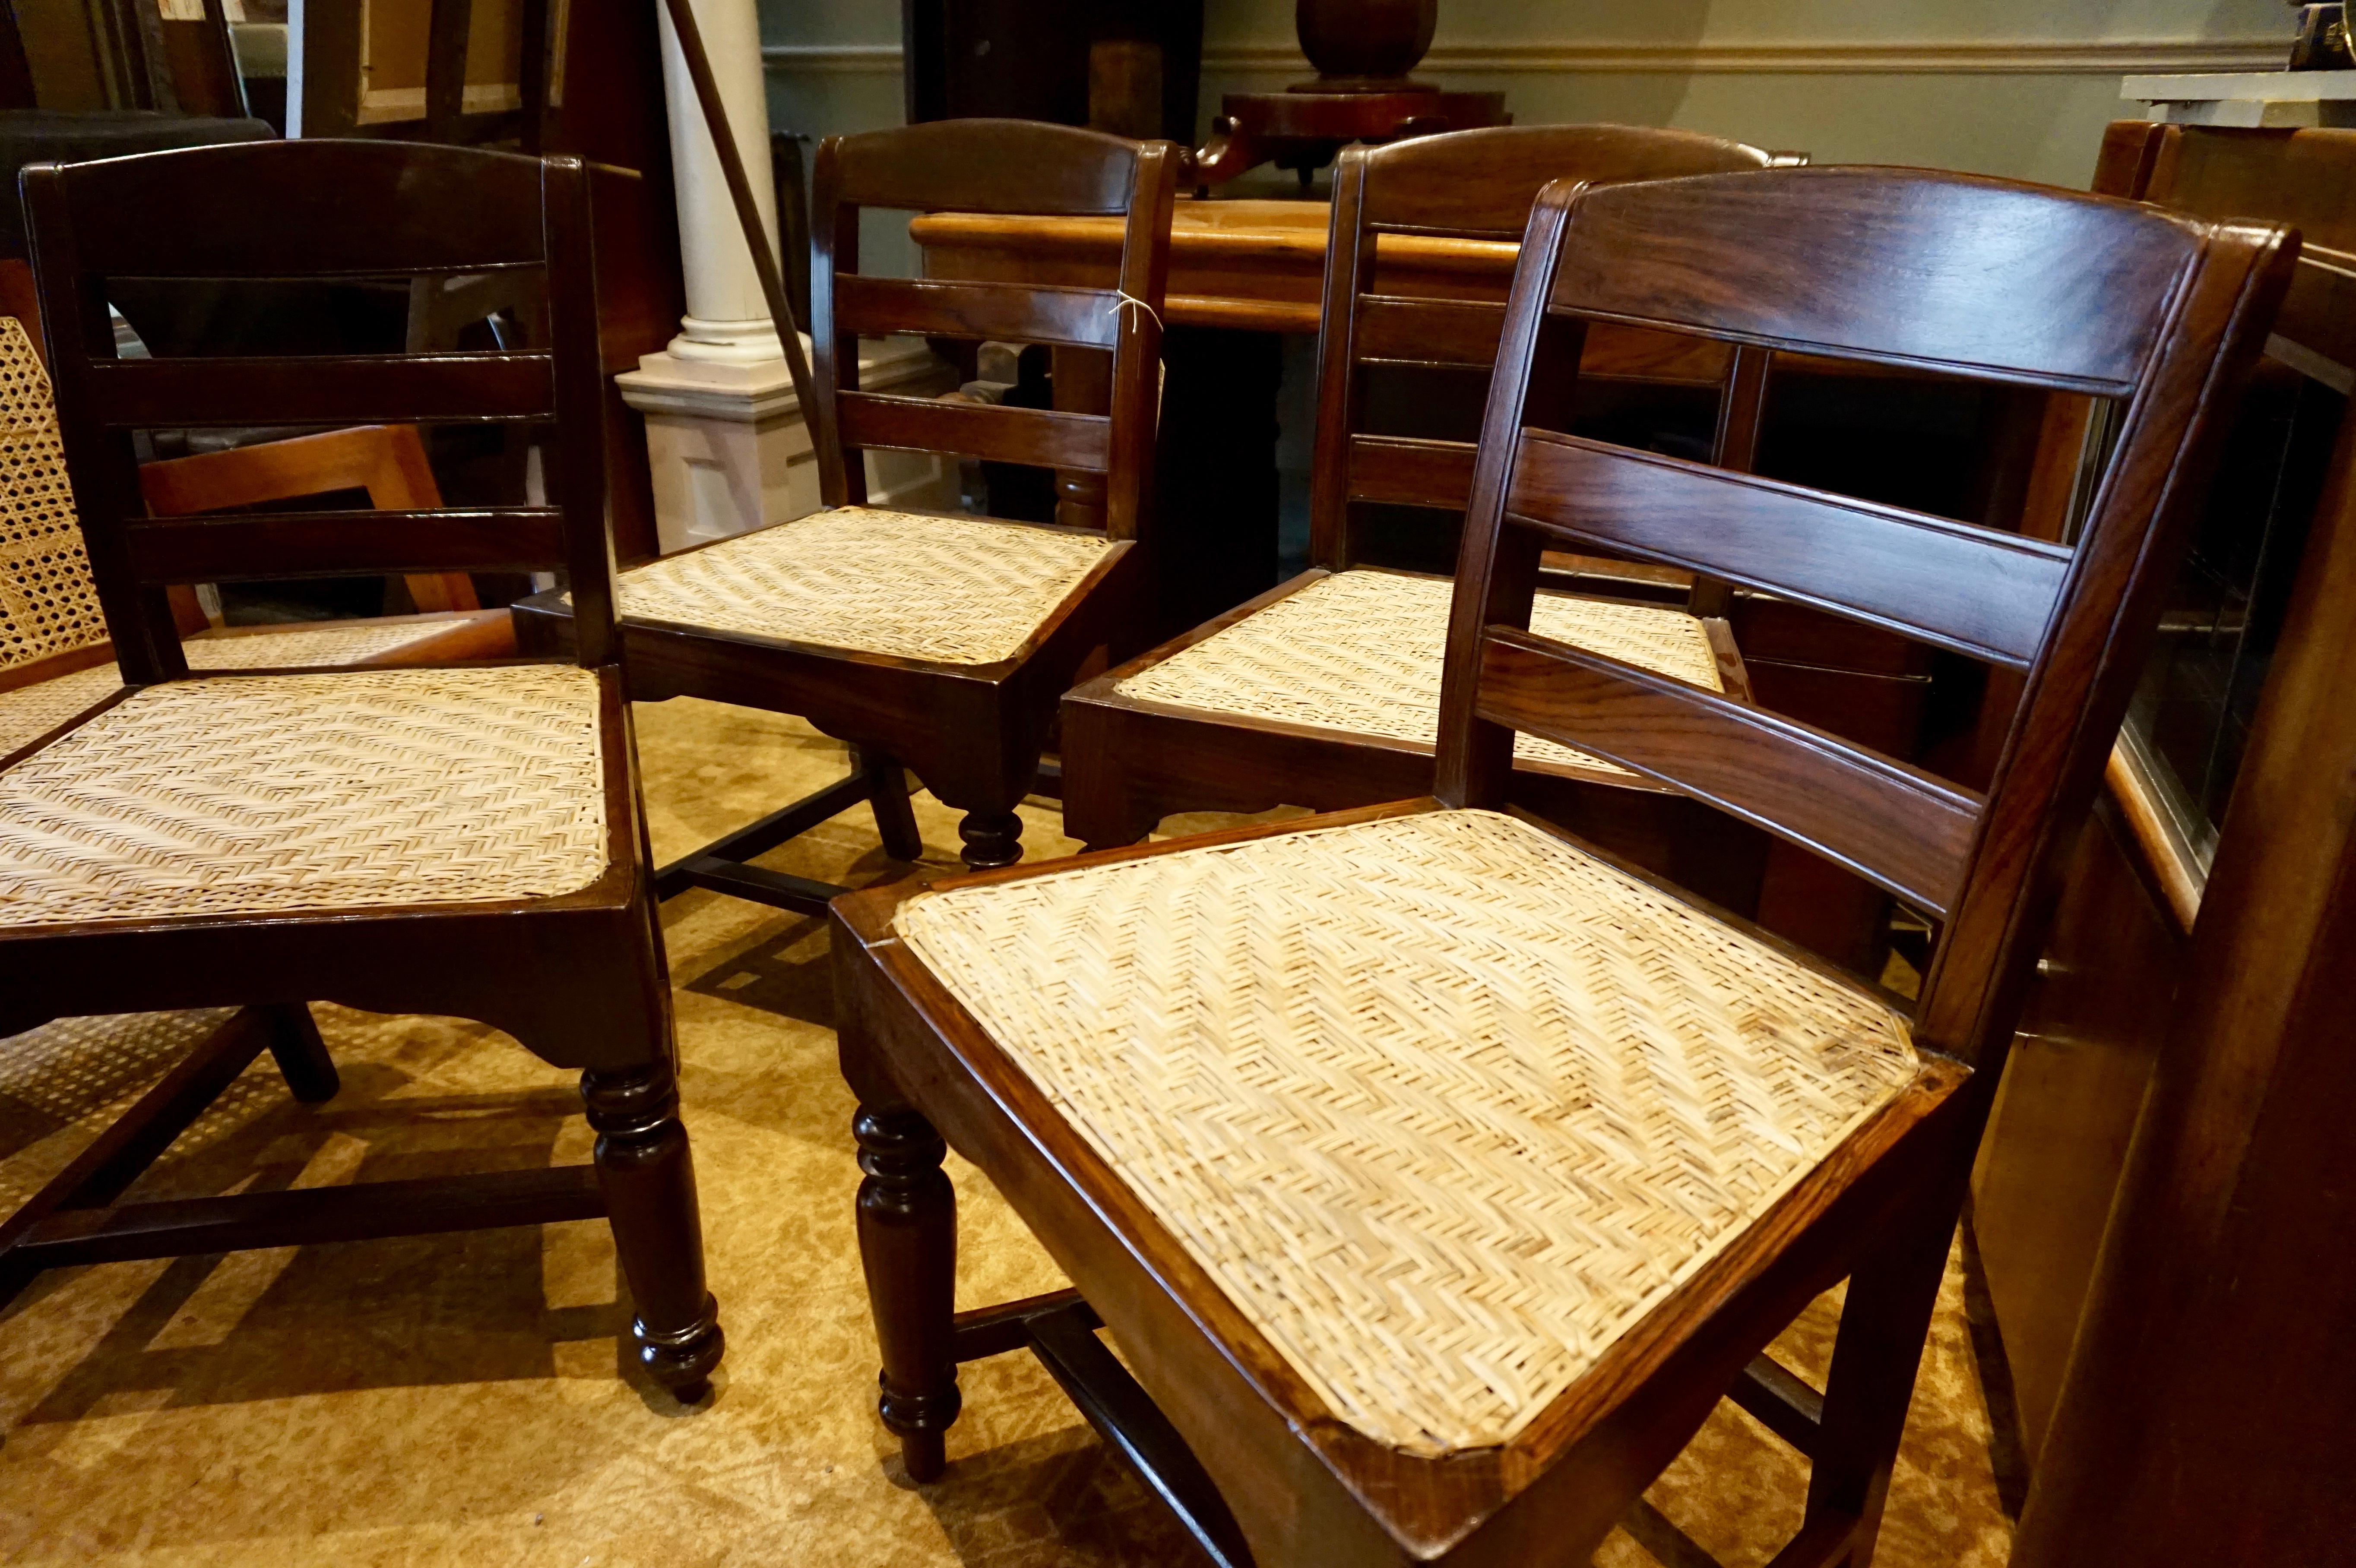 Set of four Portuguese rosewood chairs with woven rattan cane seats.
Hand carved solid rosewood chairs with basket weave re-caned seats. United by stretcher at base. Chairs are in good sturdy condition,
circa 1890s.